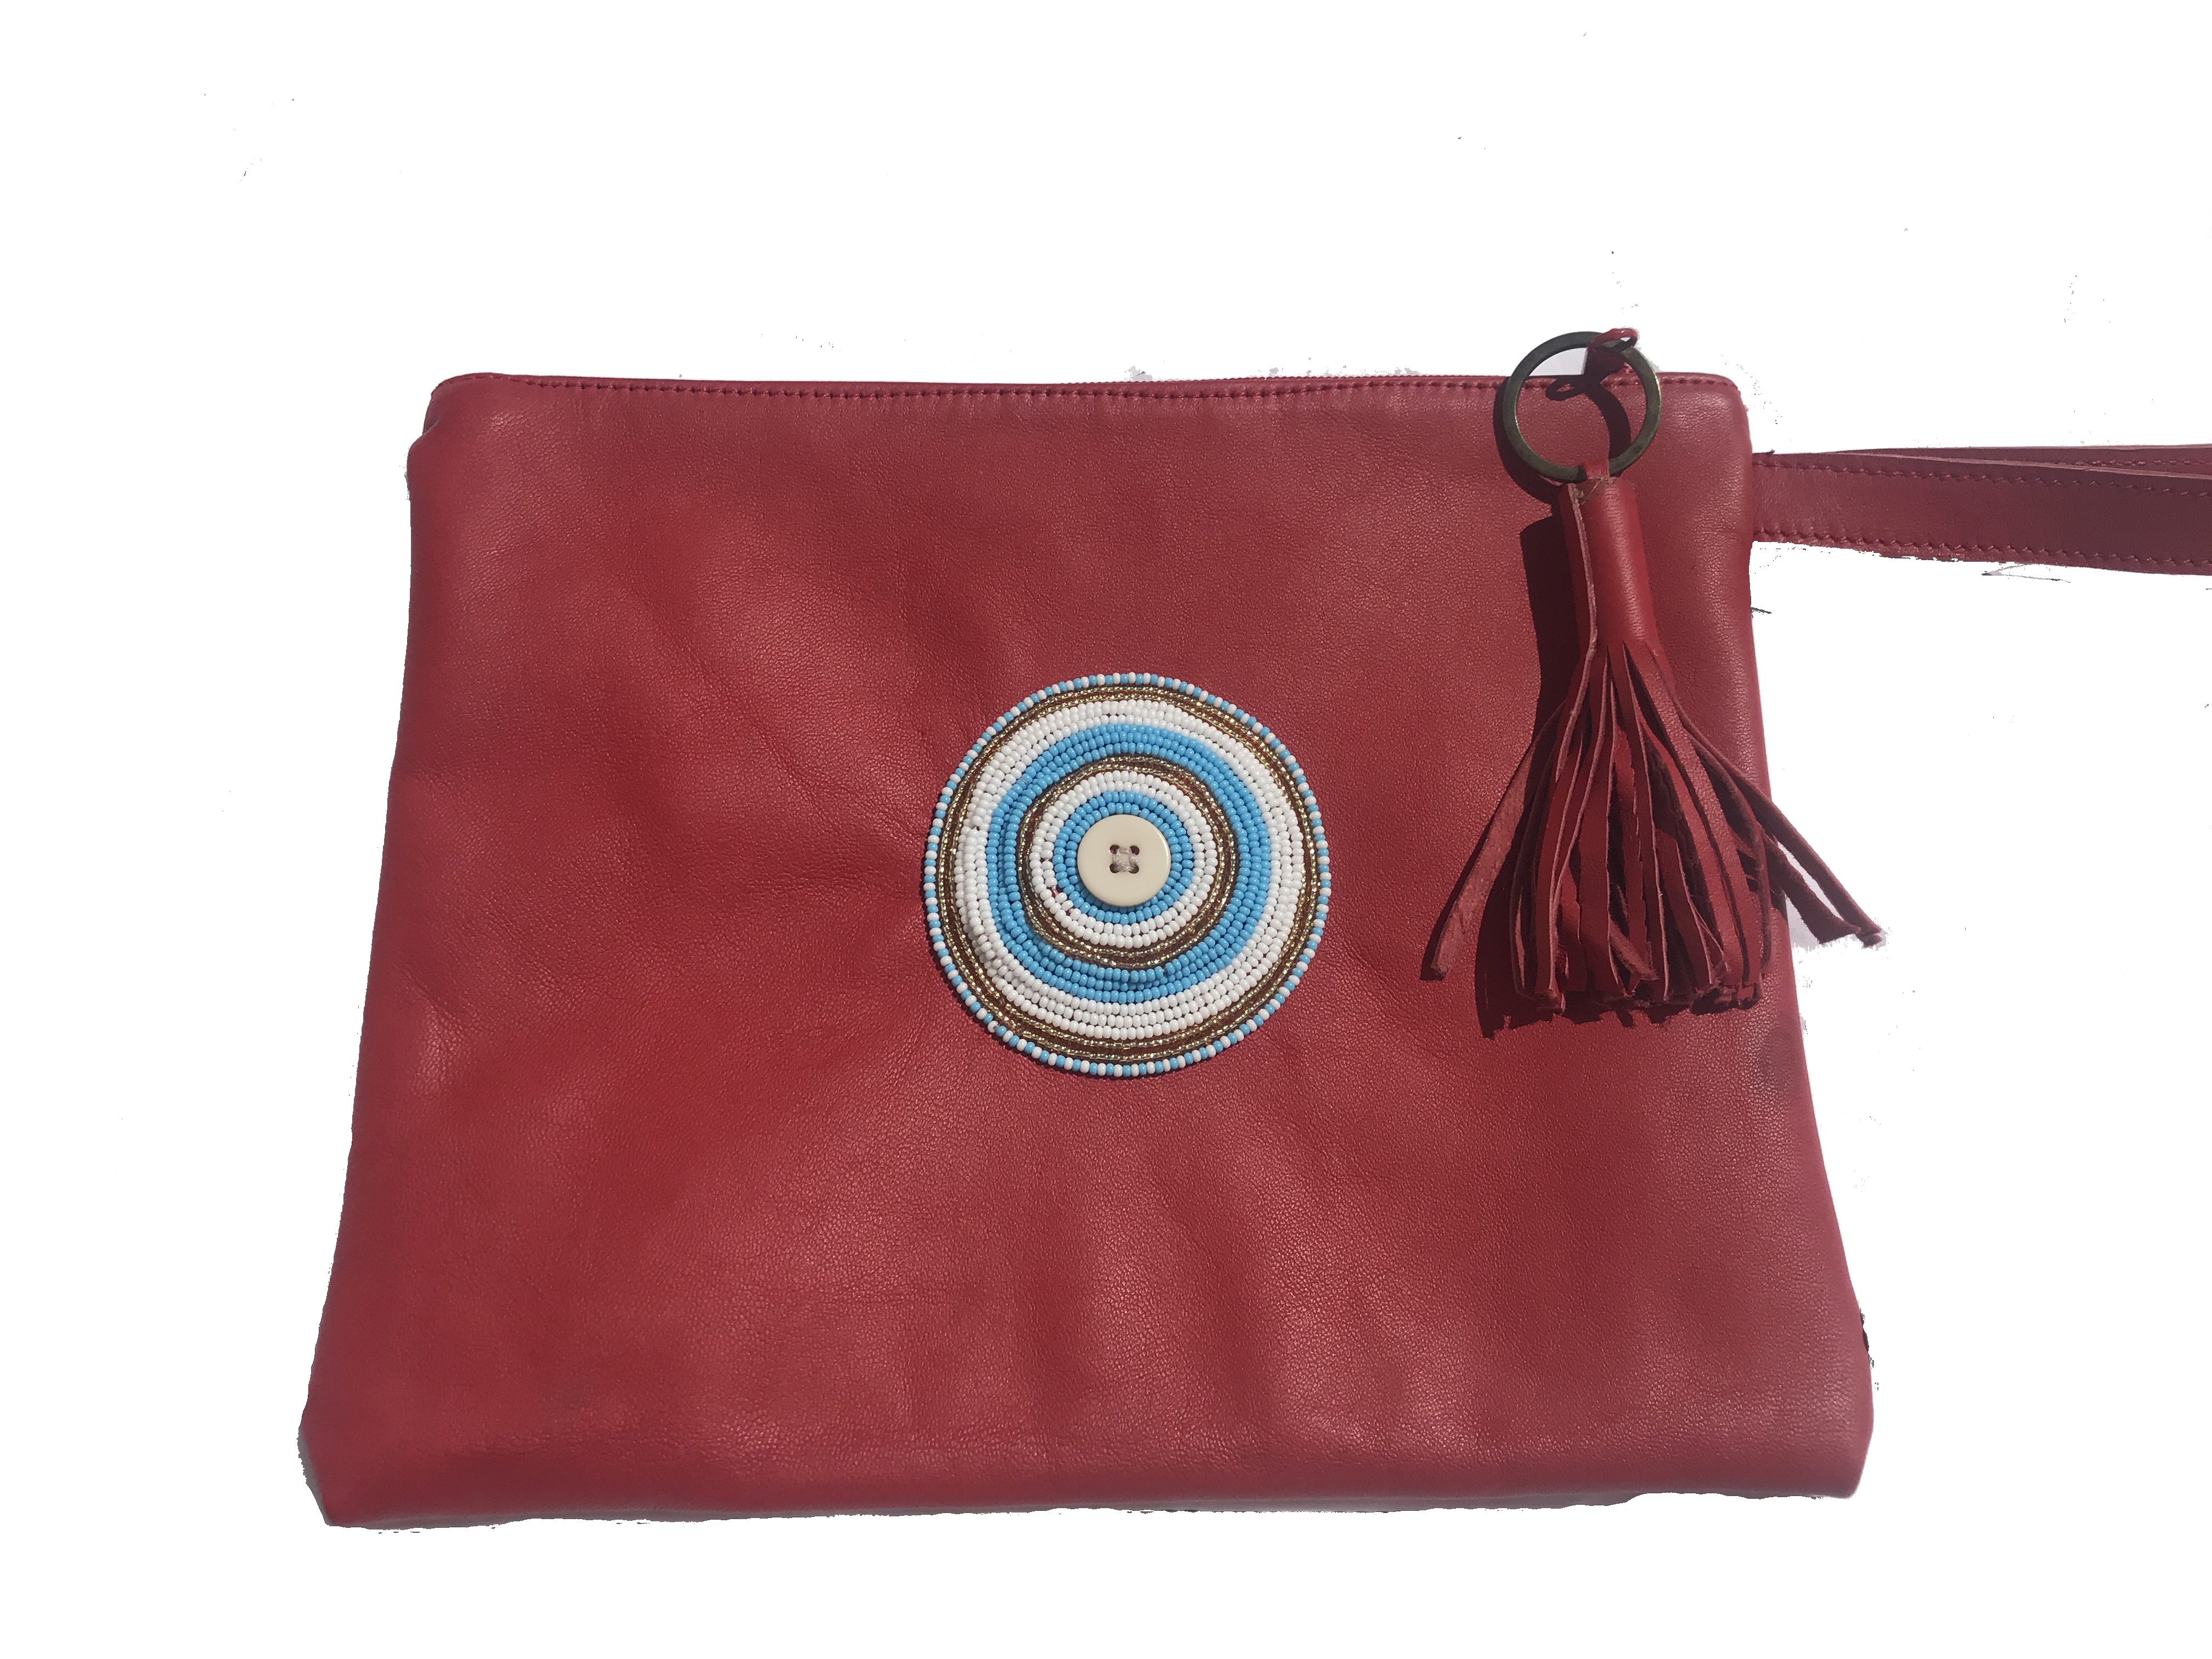 Ipad  Leather beaded clutch bag - red